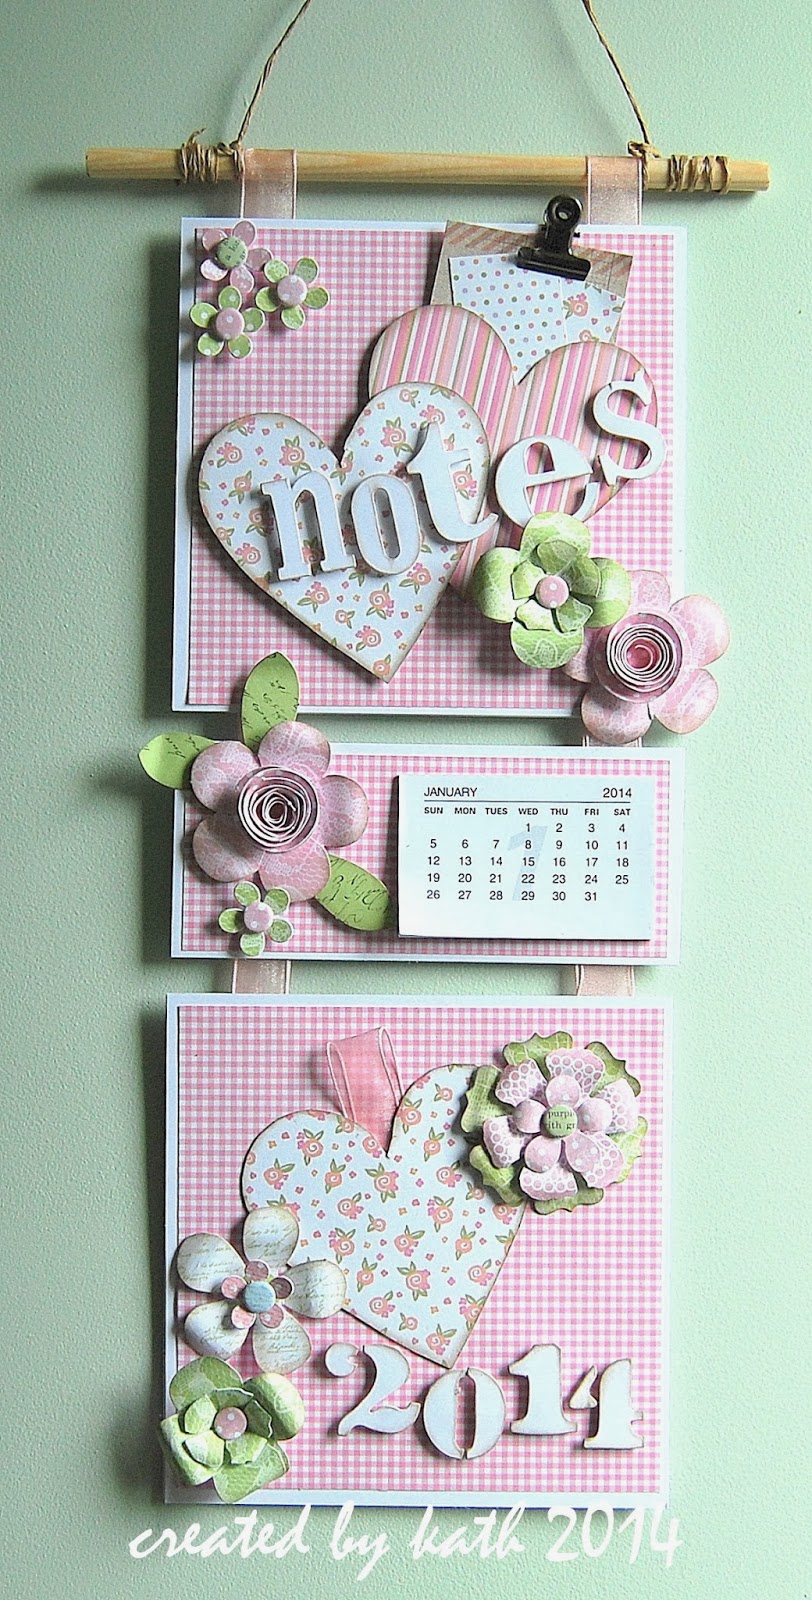 Kath's Blog......diary of the everyday life of a crafter Calendar Girl...